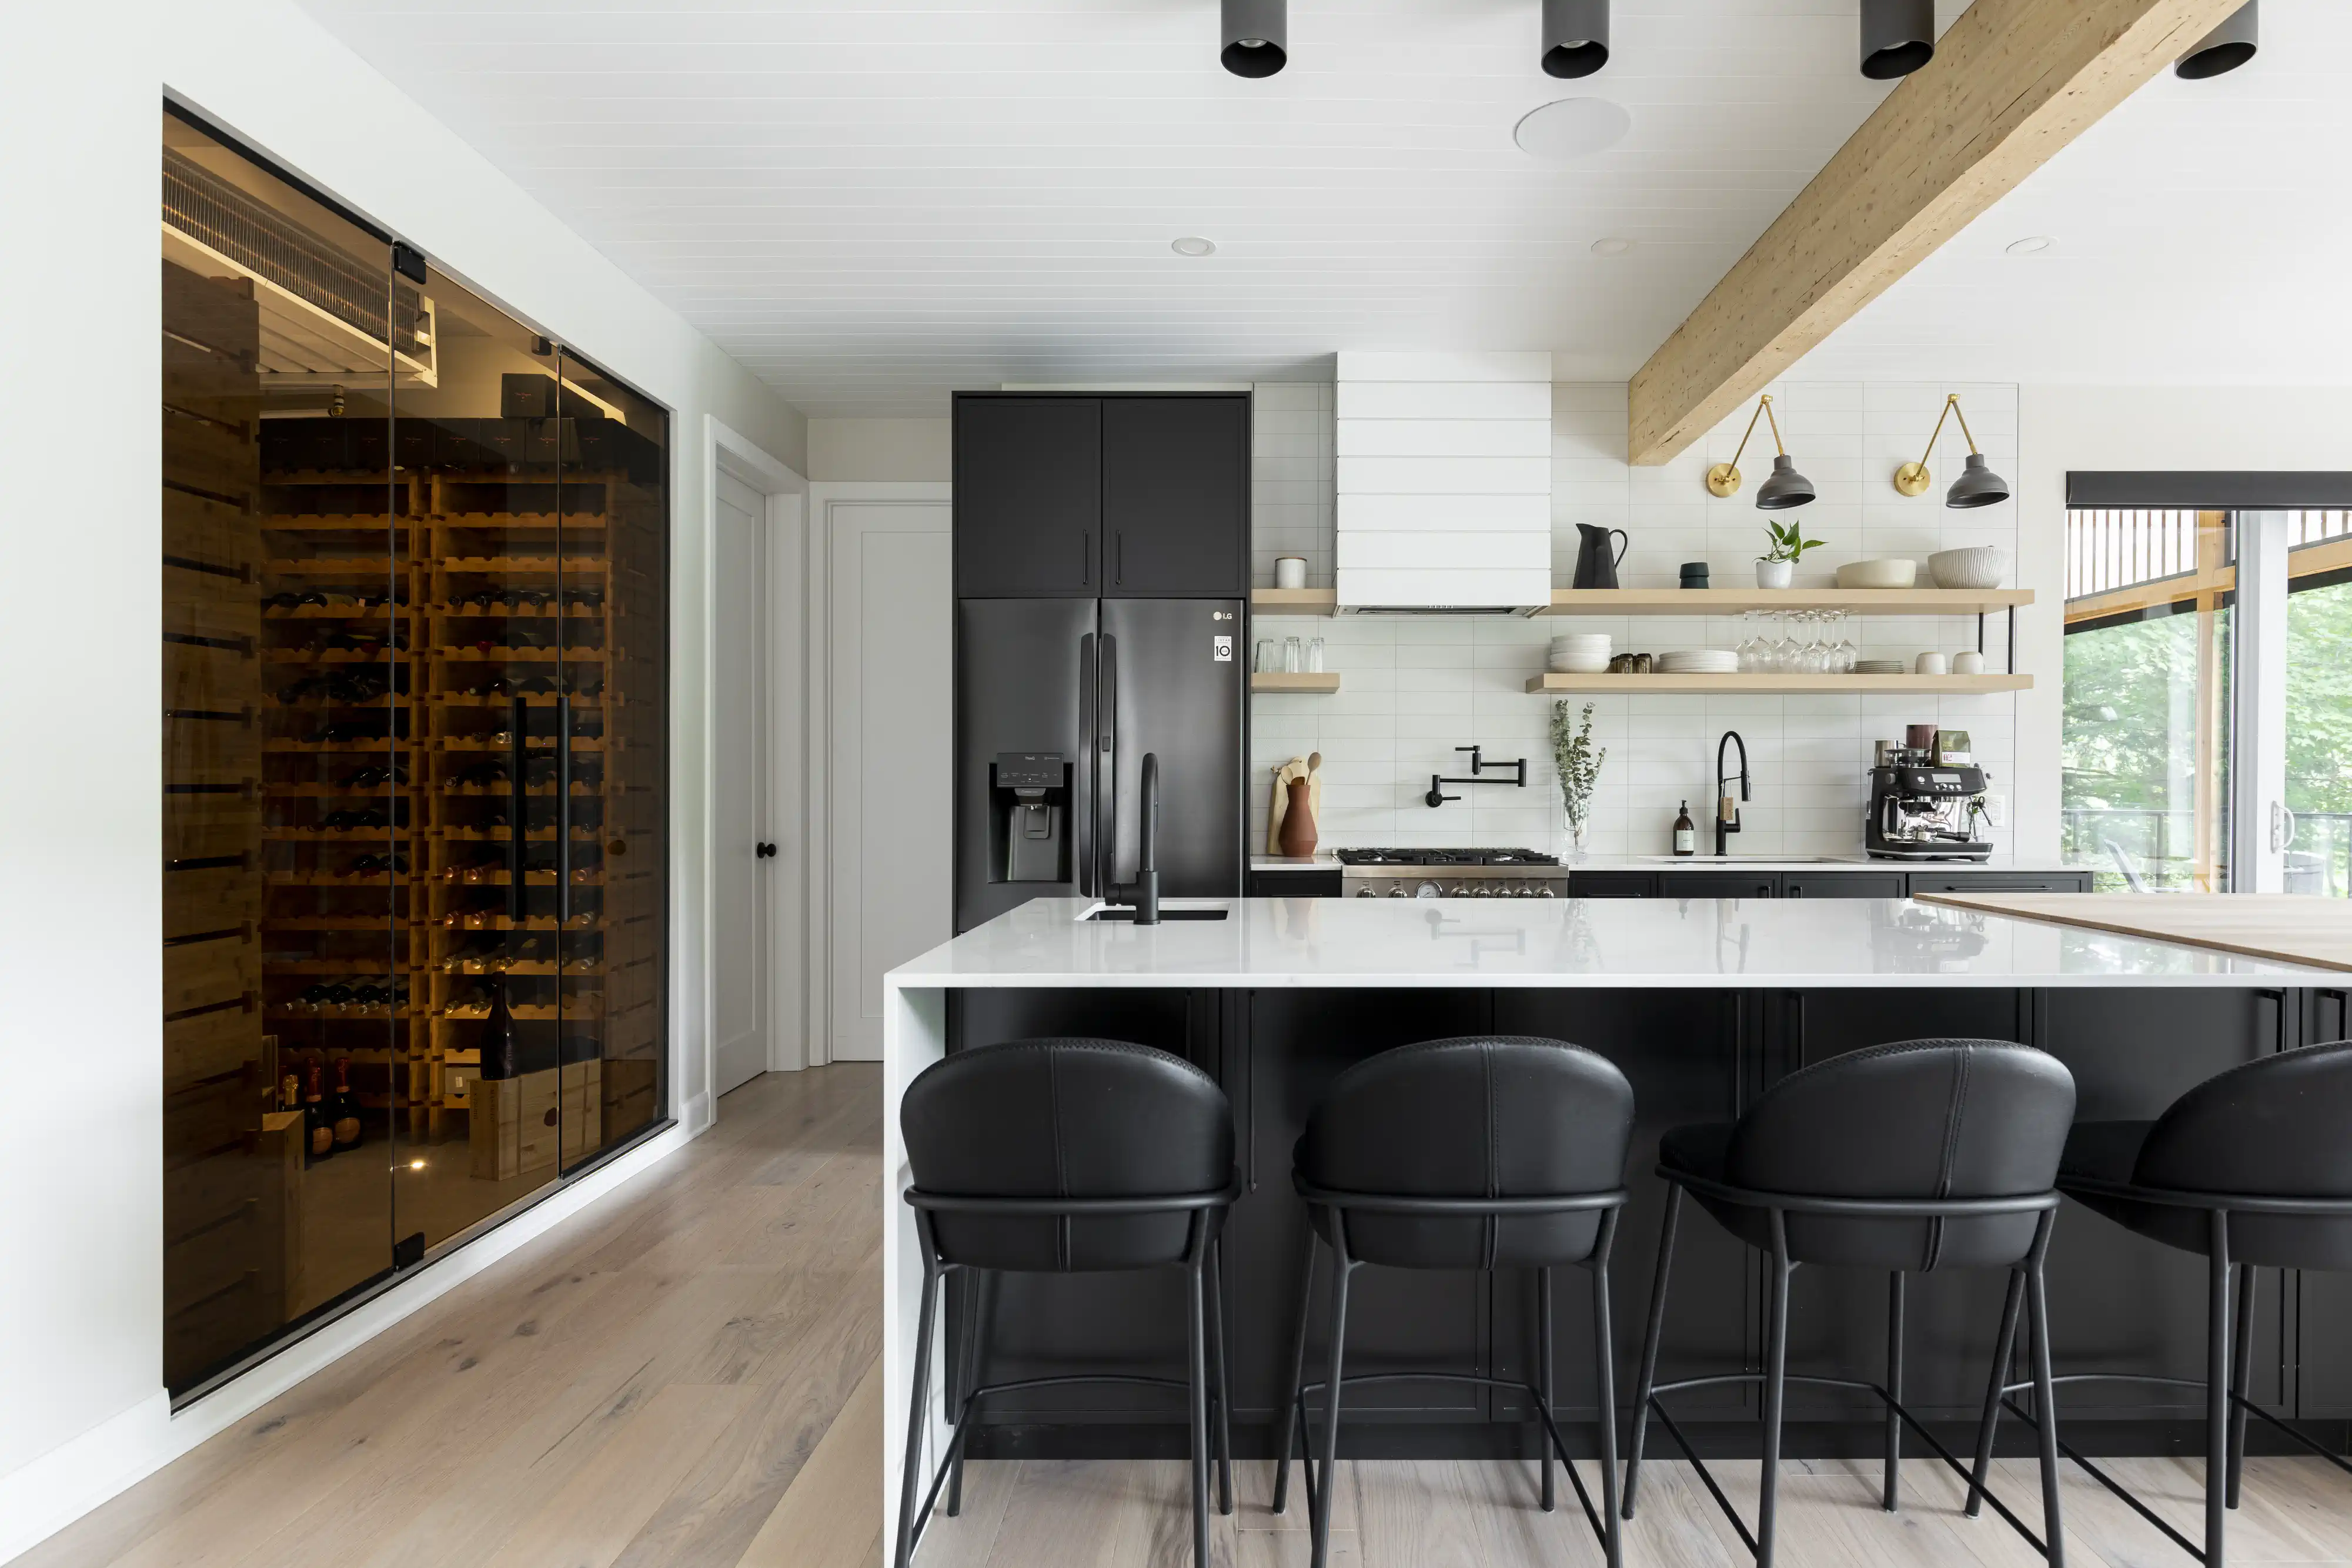 A modern kitchen with a wine cellar and a black and white color scheme, interior by Sarah Brown Design